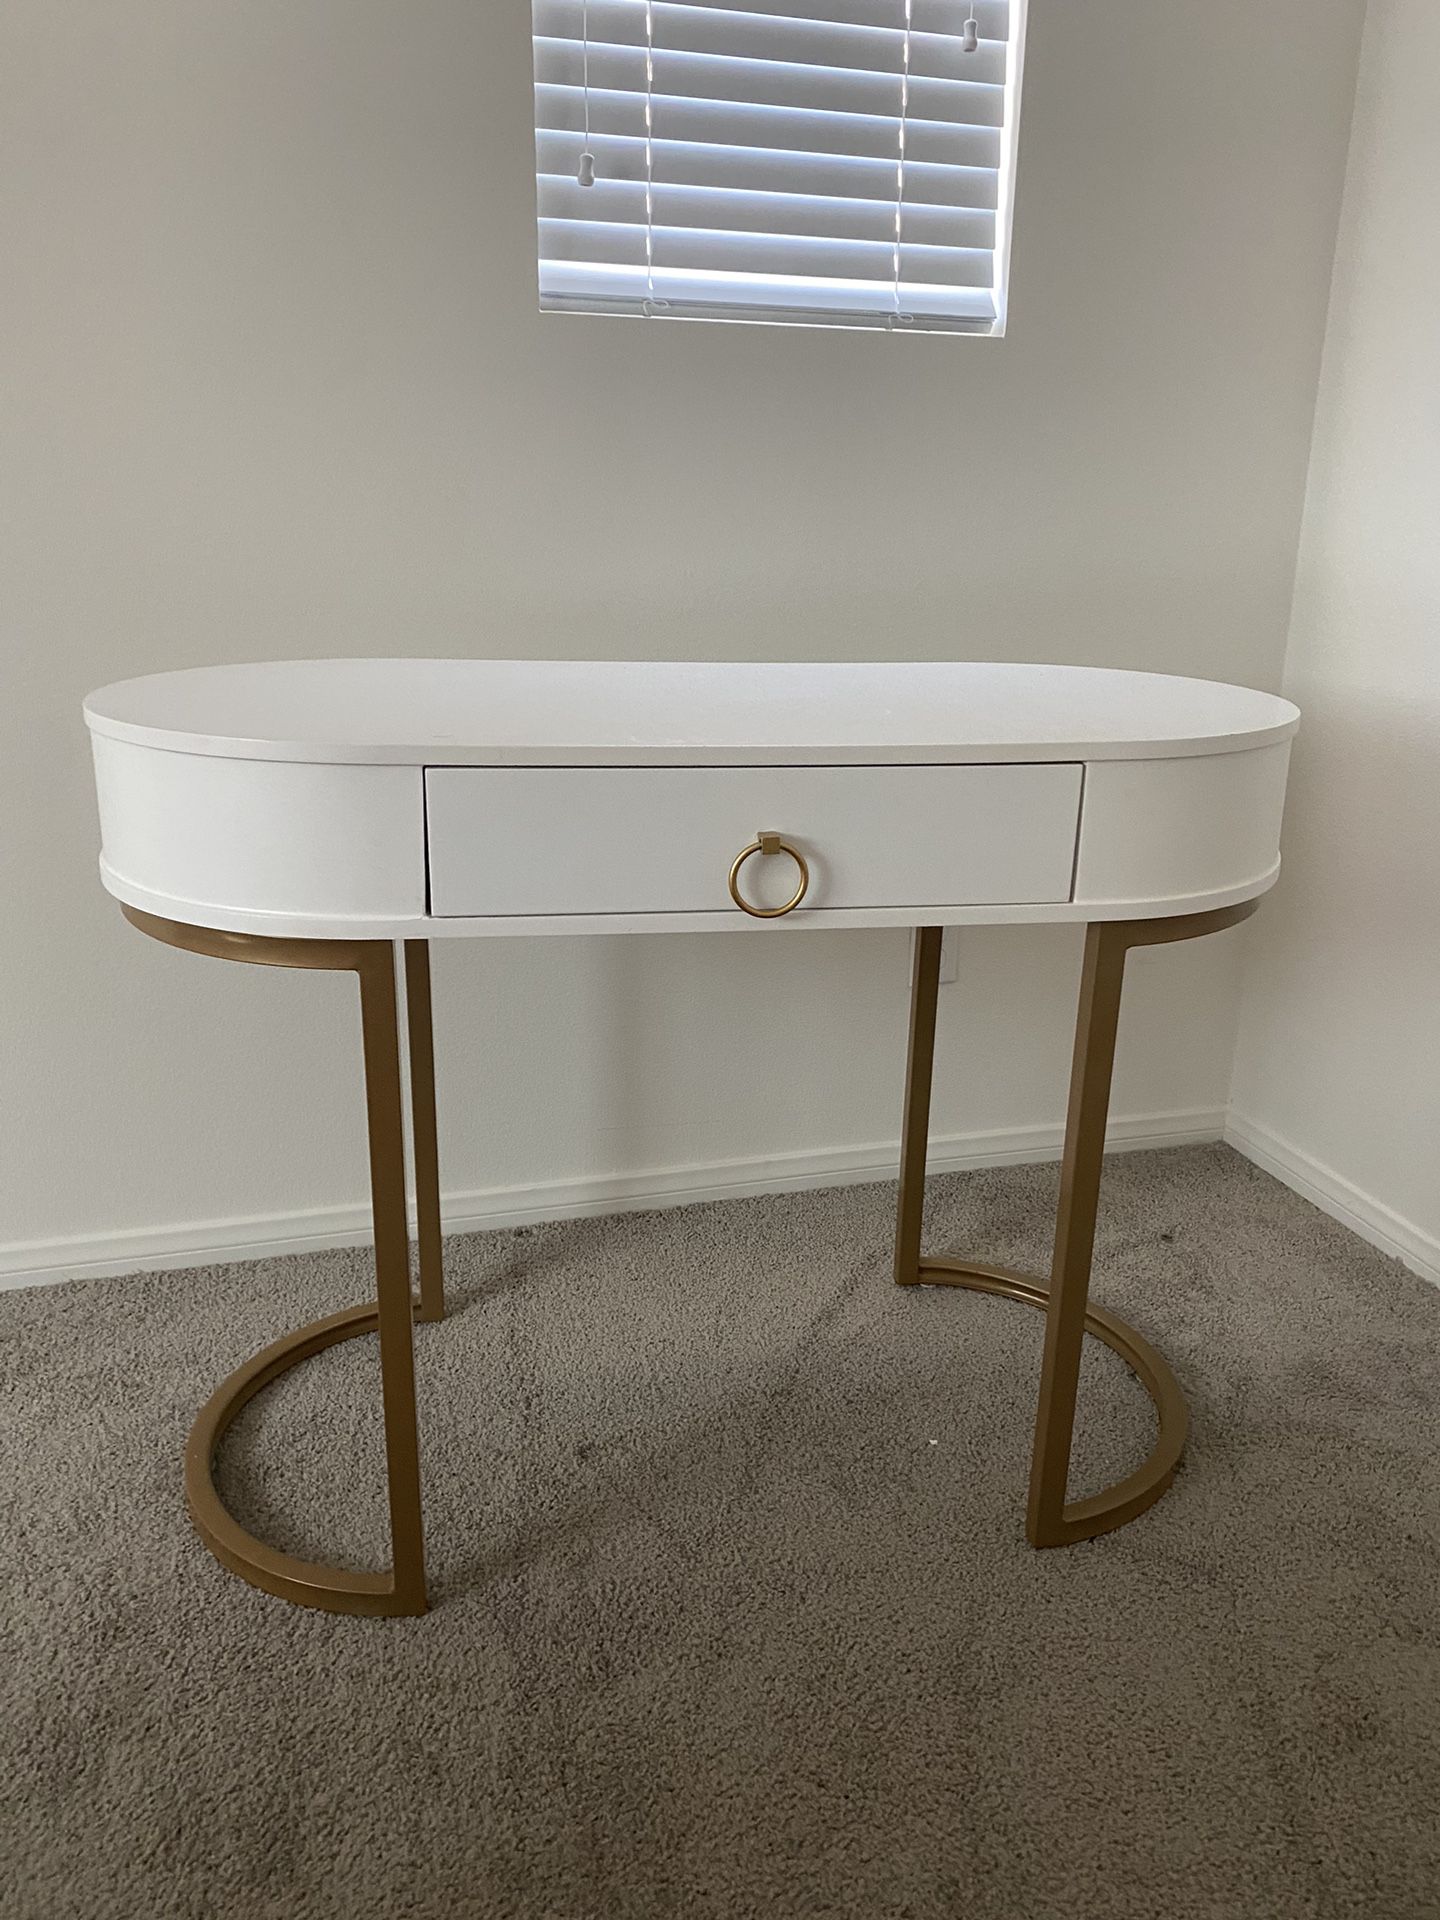 White with gold detailing desk